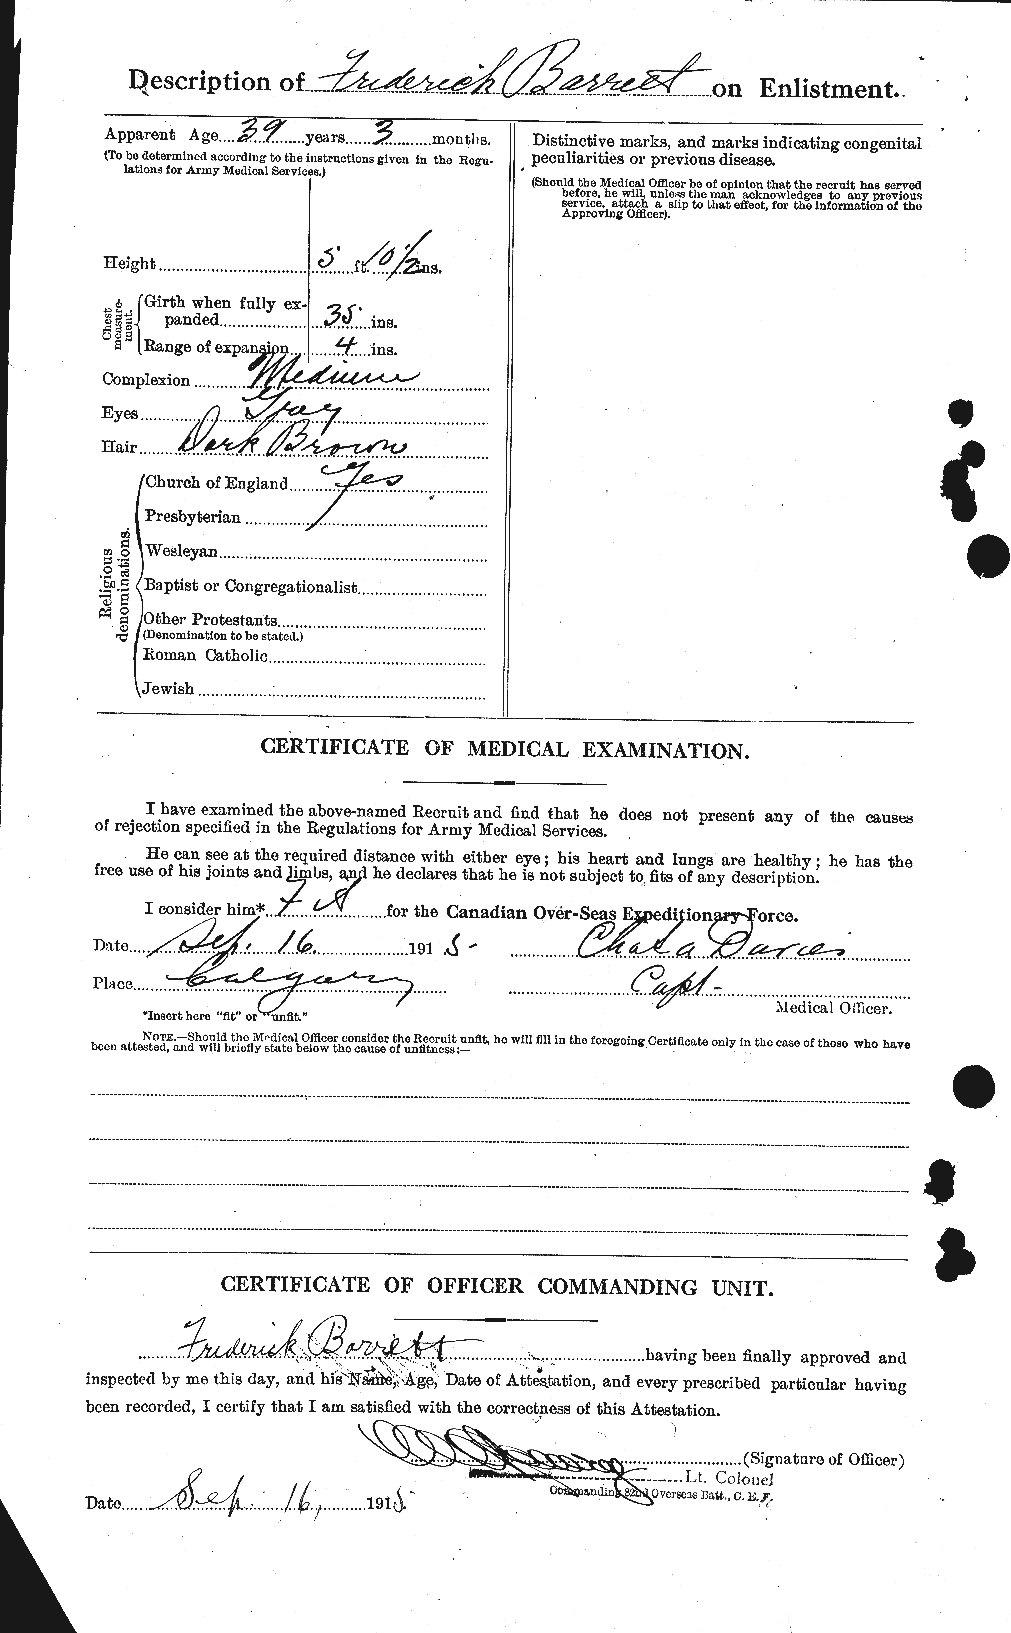 Personnel Records of the First World War - CEF 220327b